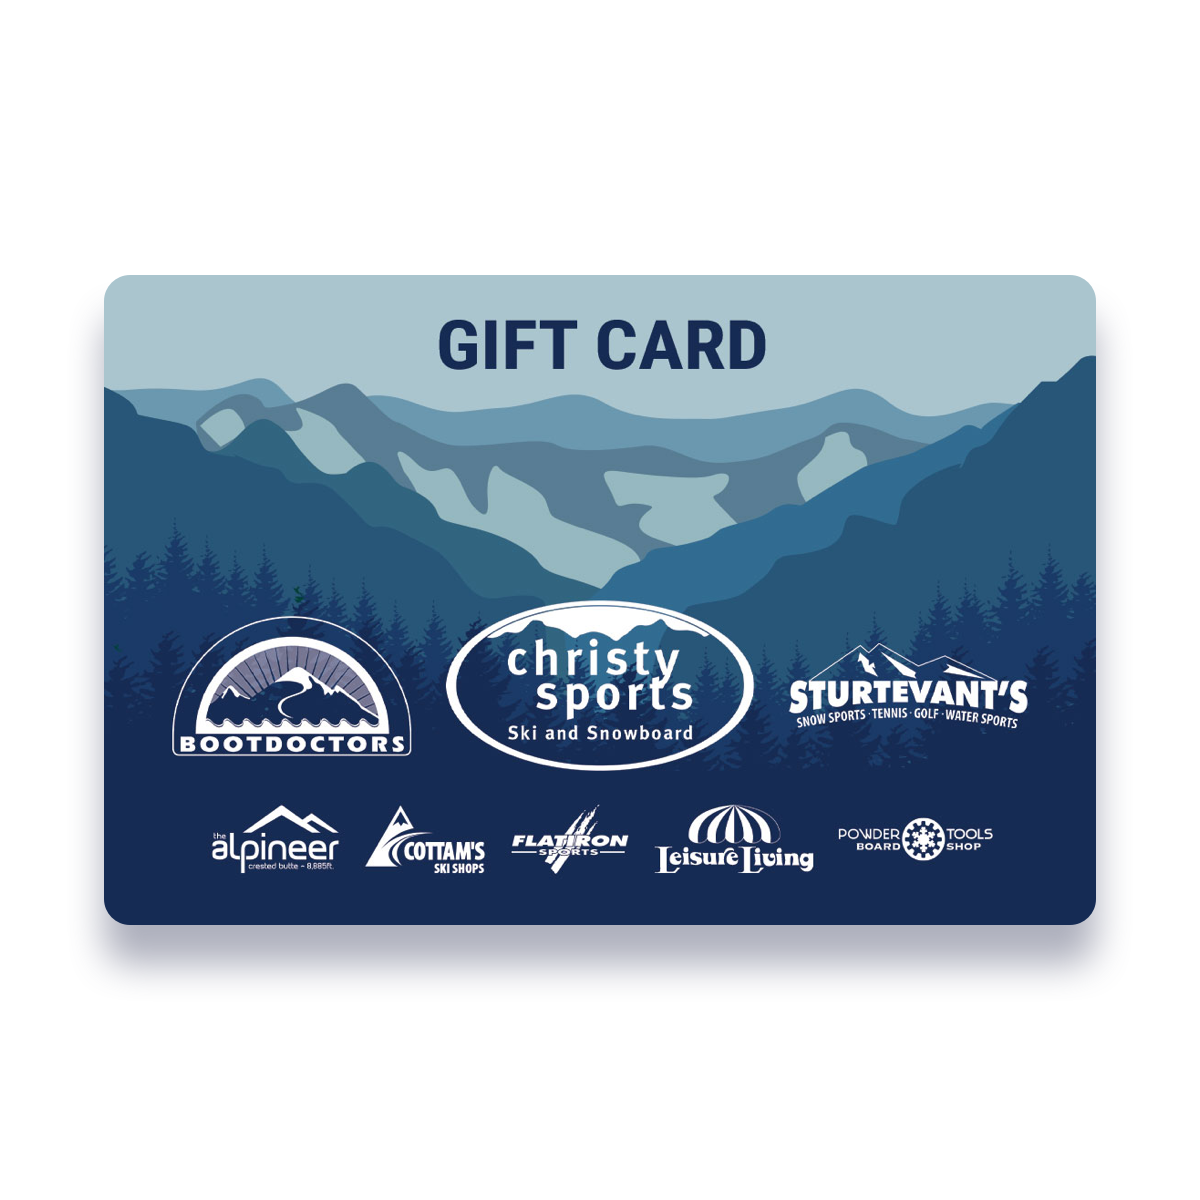 Christy sports gift card